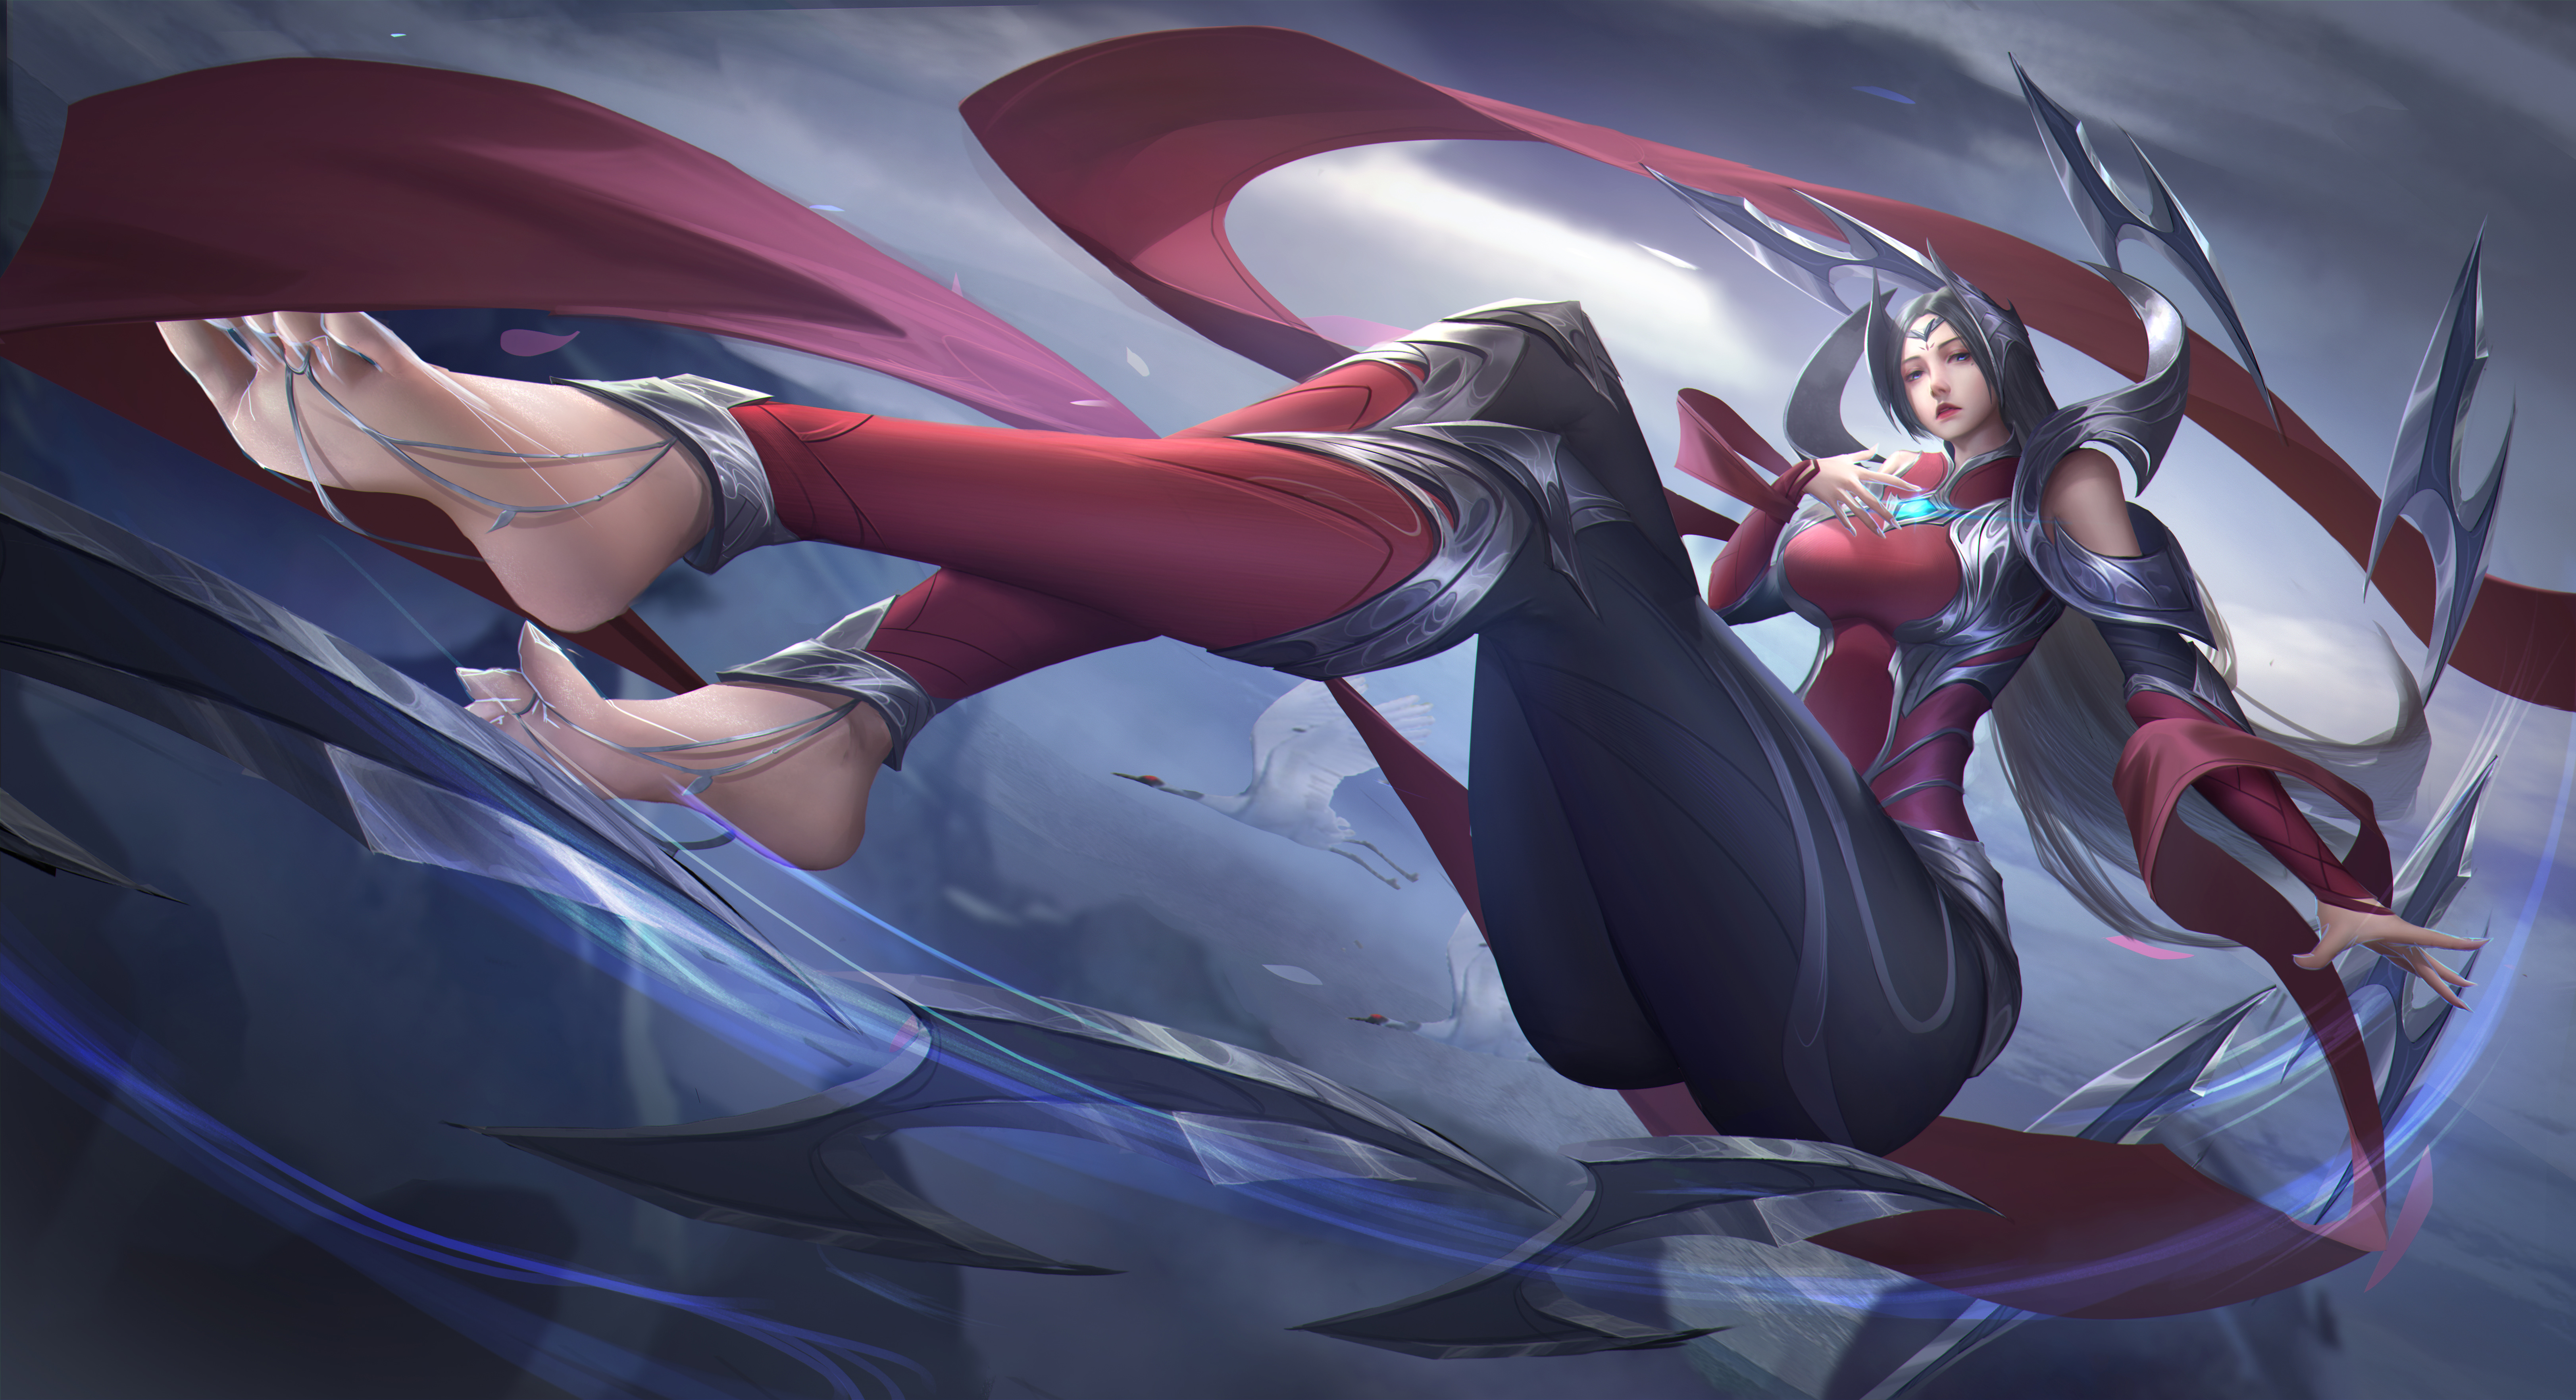 General 6491x3528 Irelia (League of Legends) League of Legends video games video game girls video game characters fantasy girl fictional character fantasy art armor thick thigh perspective artwork 2D illustration drawing fan art